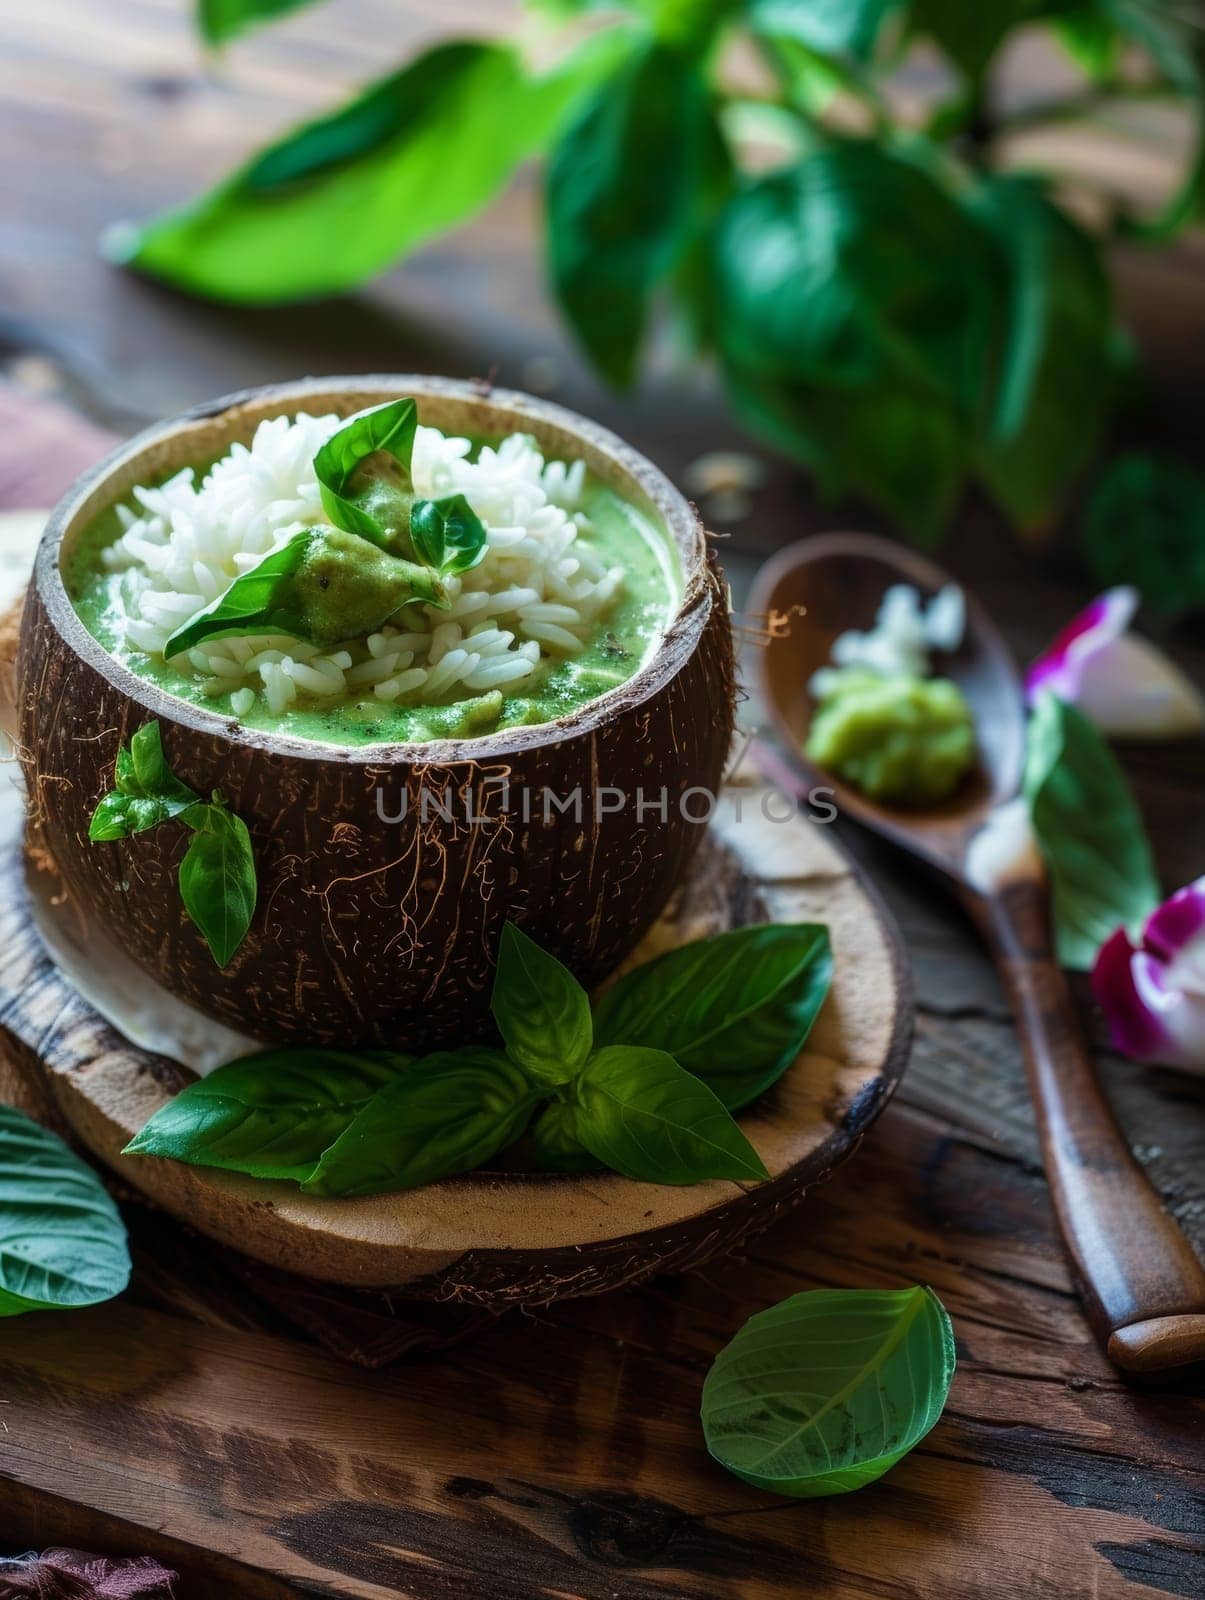 Thai green curry served in a coconut shell, accompanied by fragrant jasmine rice and fresh basil leaves. A delicious and aromatic dish representing the flavors of Thailand